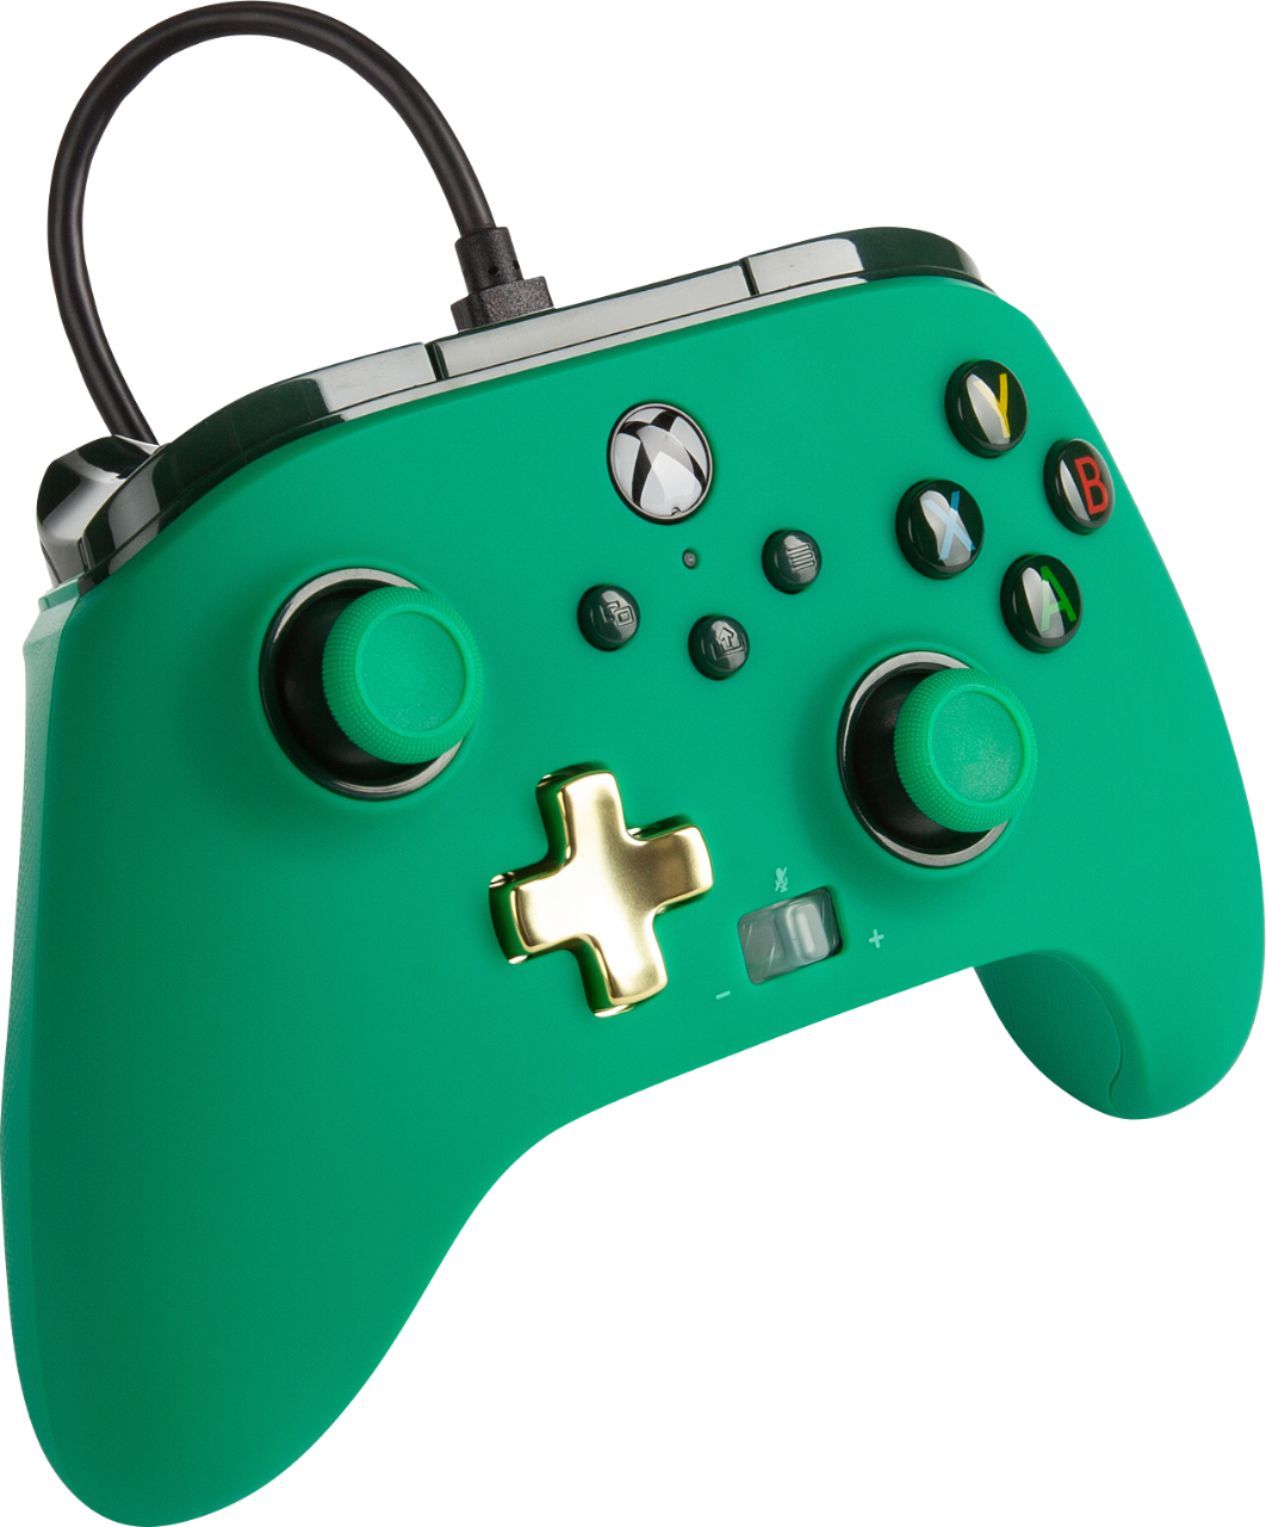 Angle View: PowerA - Enhanced Wired Controller for Xbox Series X|S - Green